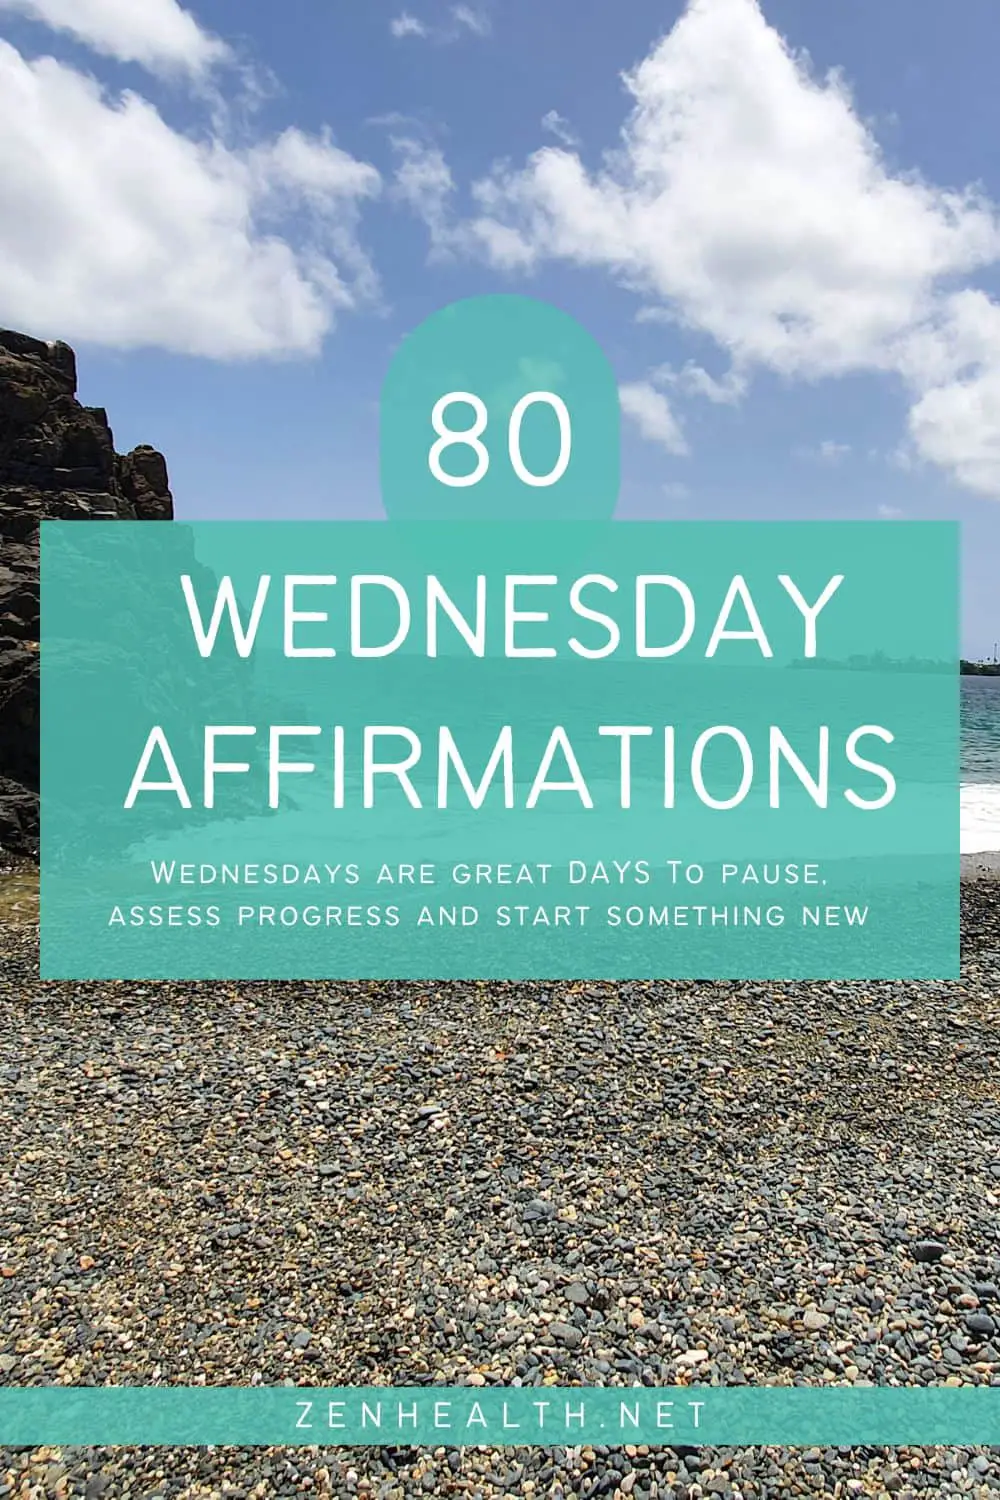 wednesday affirmations: wednesdays are great days to pause